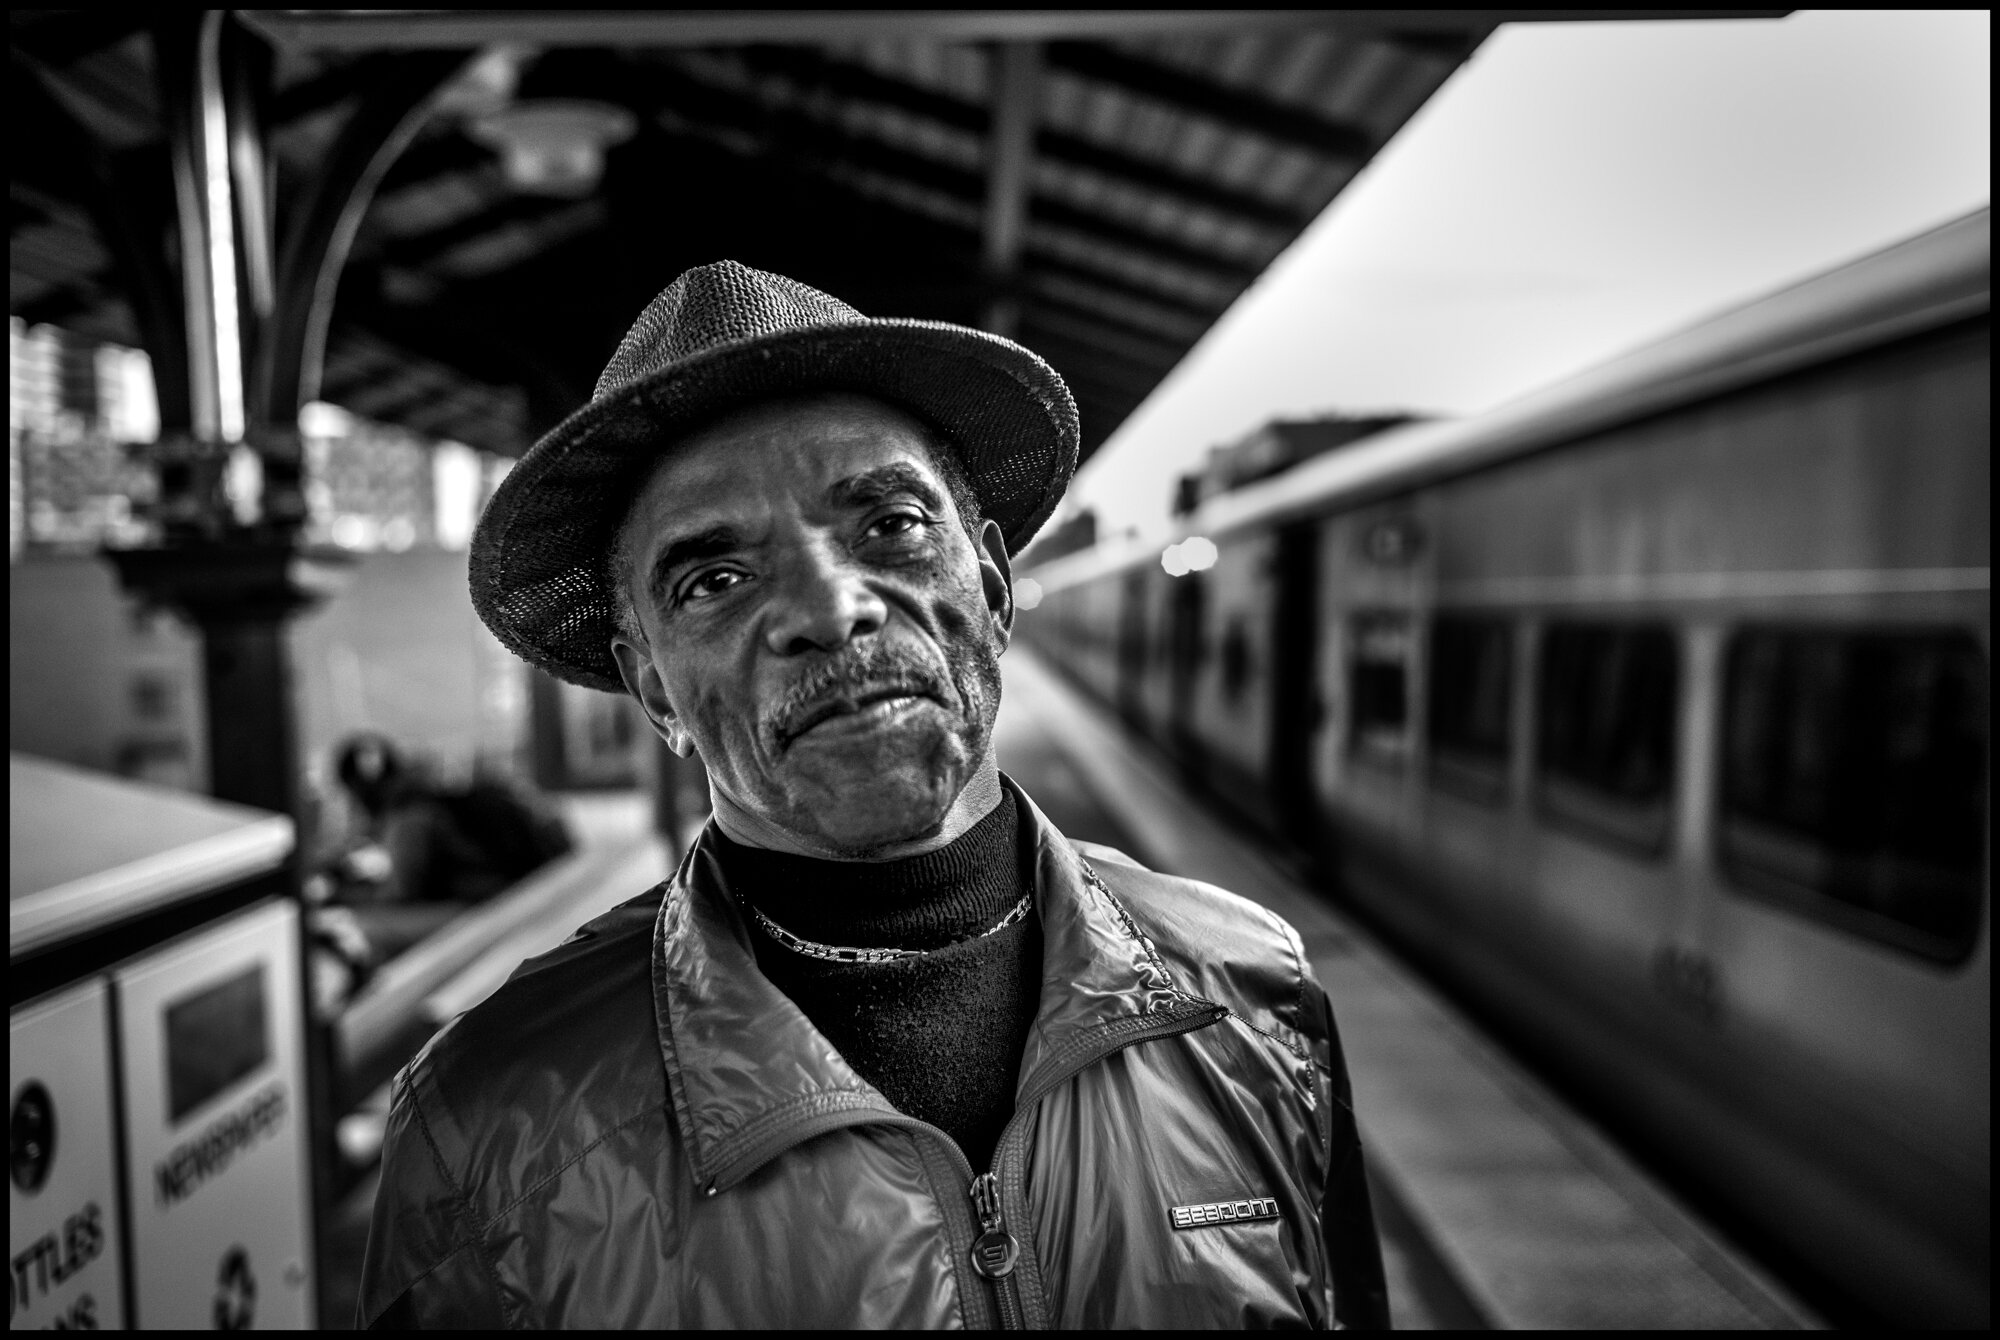  C. Marsh who told me he is a doctor, waits for a train home at the 125thStreet train station in Harlem. I asked him who he felt about the situation, and he said, “please don’t ask me that-it’s been a really long day.”  March 24, 2020. © Peter Turnle